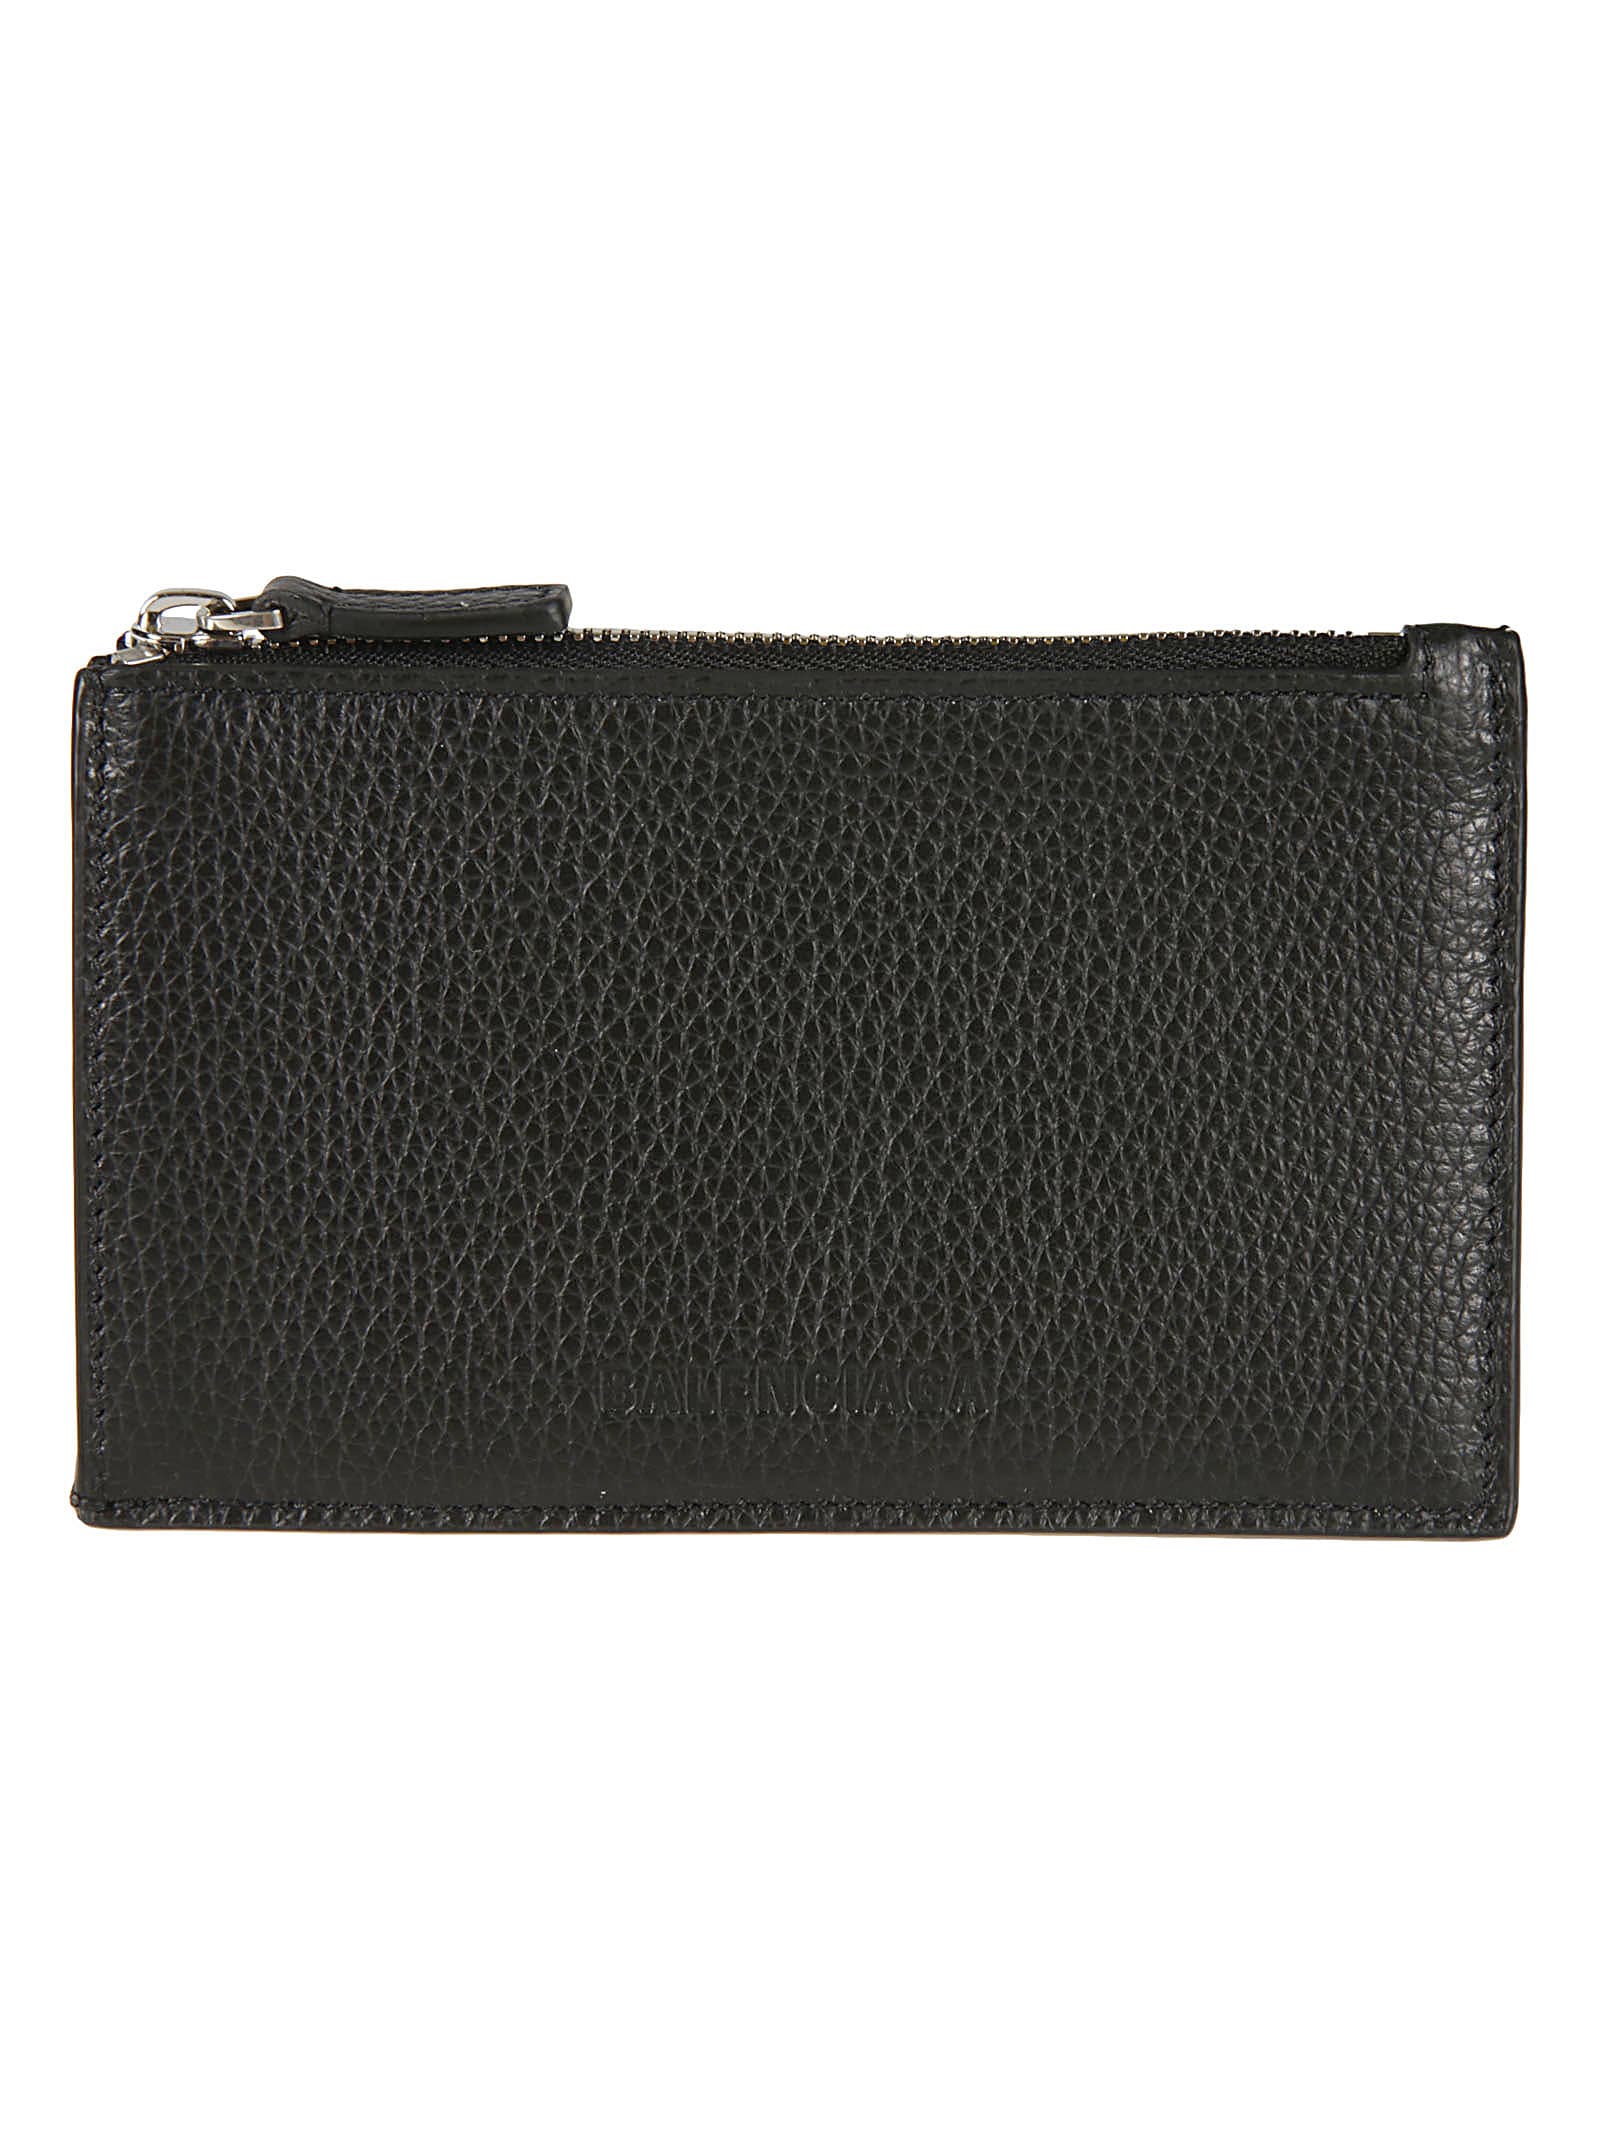 Balenciaga Grained Leather Top Zipped Card Holder